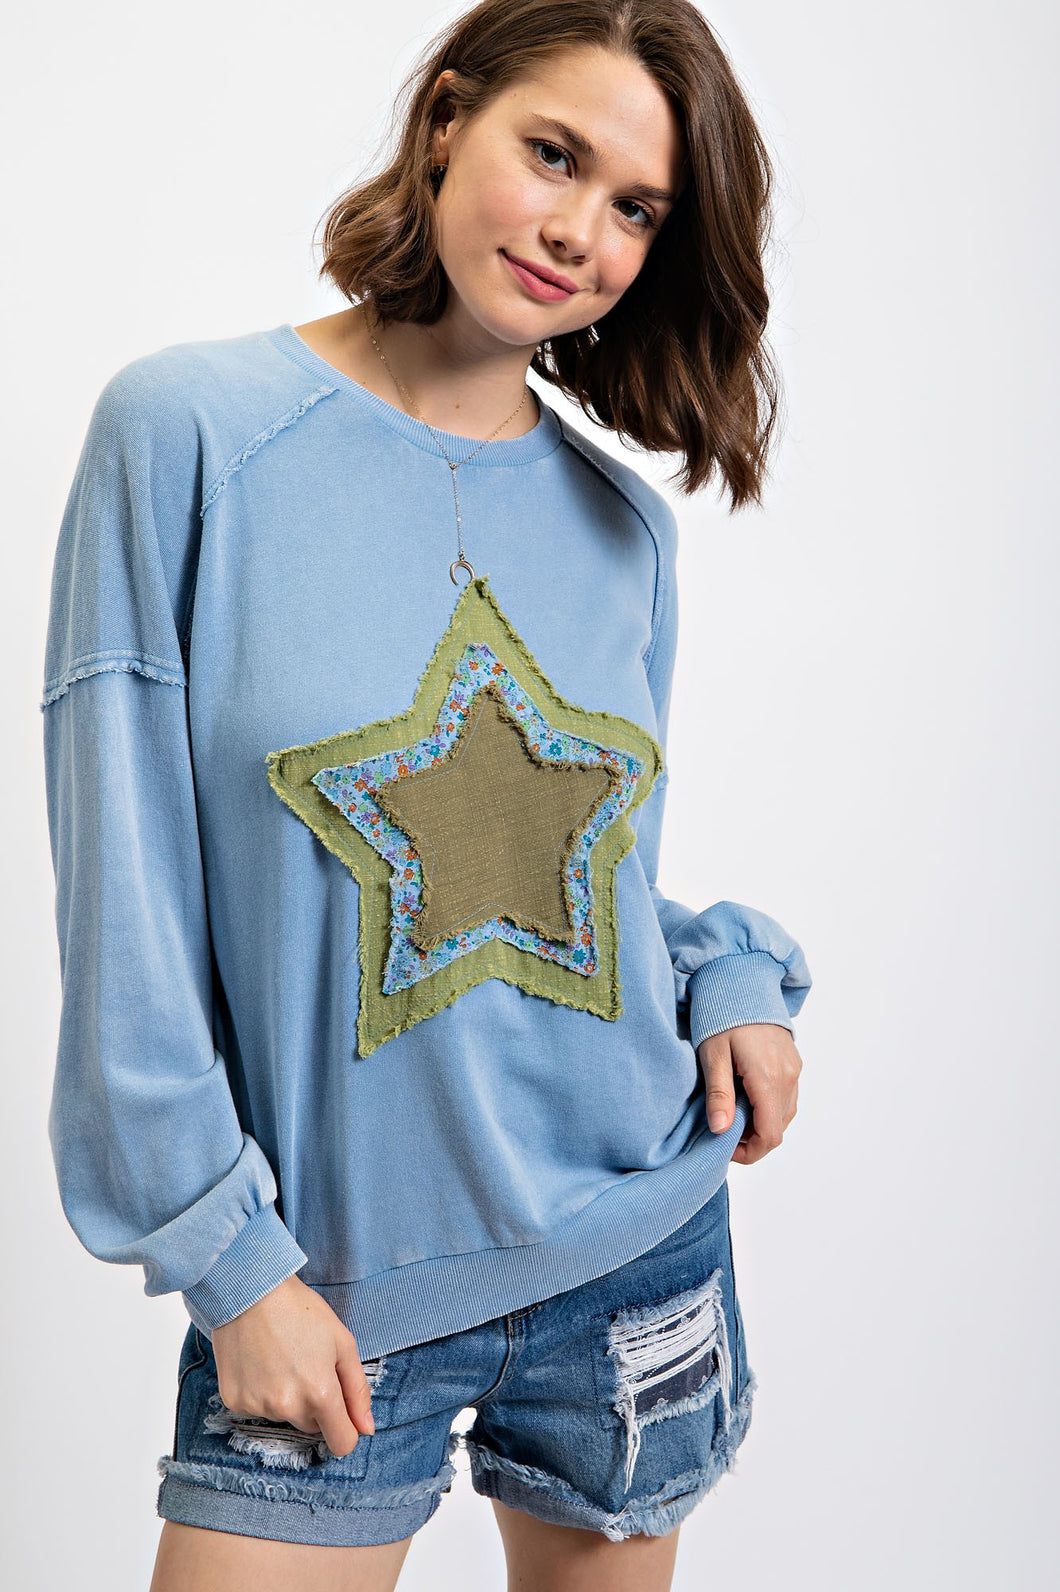 Easel Star Patch Pullover Top in Washed Denim ON ORDER LATE OCTOBER ARRIVAL Shirts & Tops Easel   